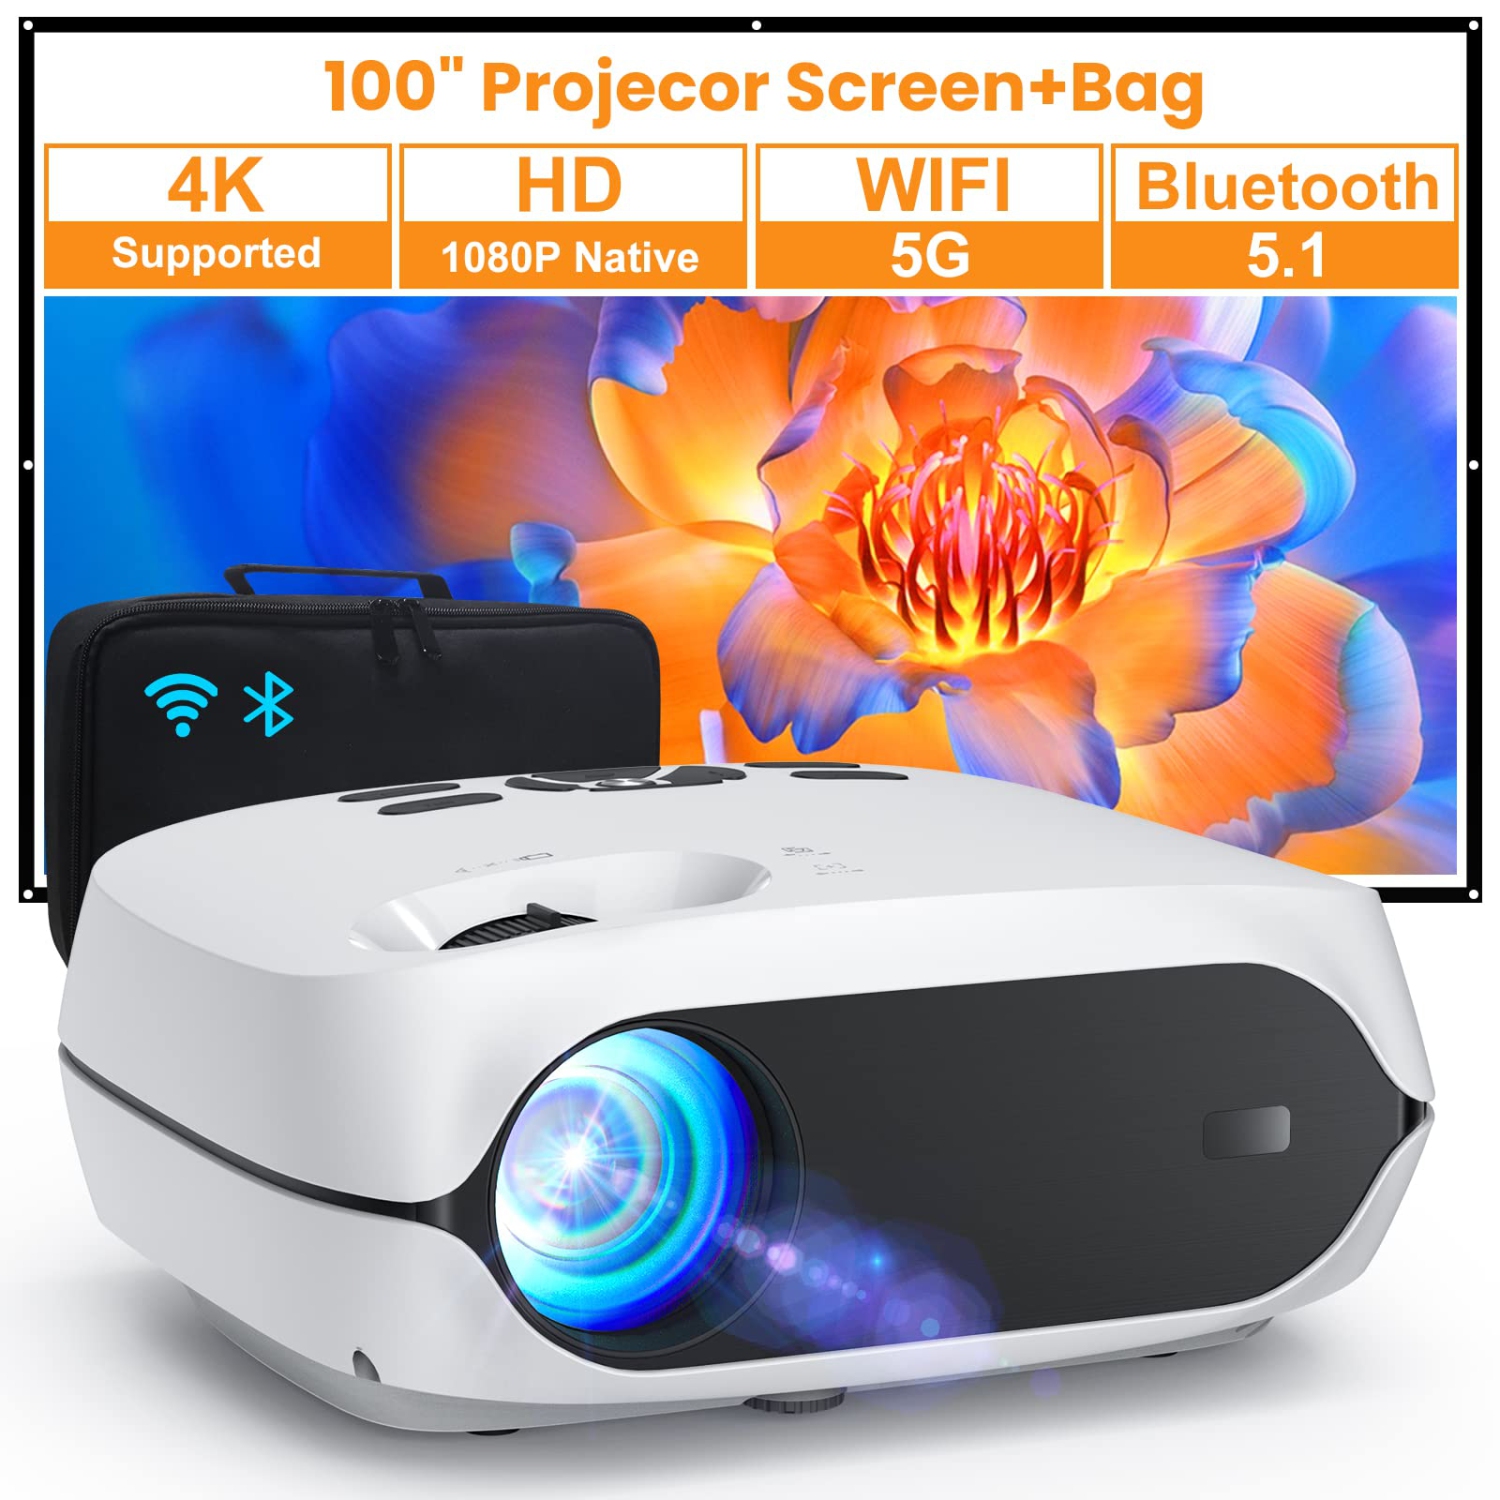 Projector, 5G WiFi Bluetooth Projector, Native 1080P Portable Projector with Screen and Bag, 12000L 4K Support 300" Outdoor Movie Projector Compatible with Smartphone/HDMI/USB/